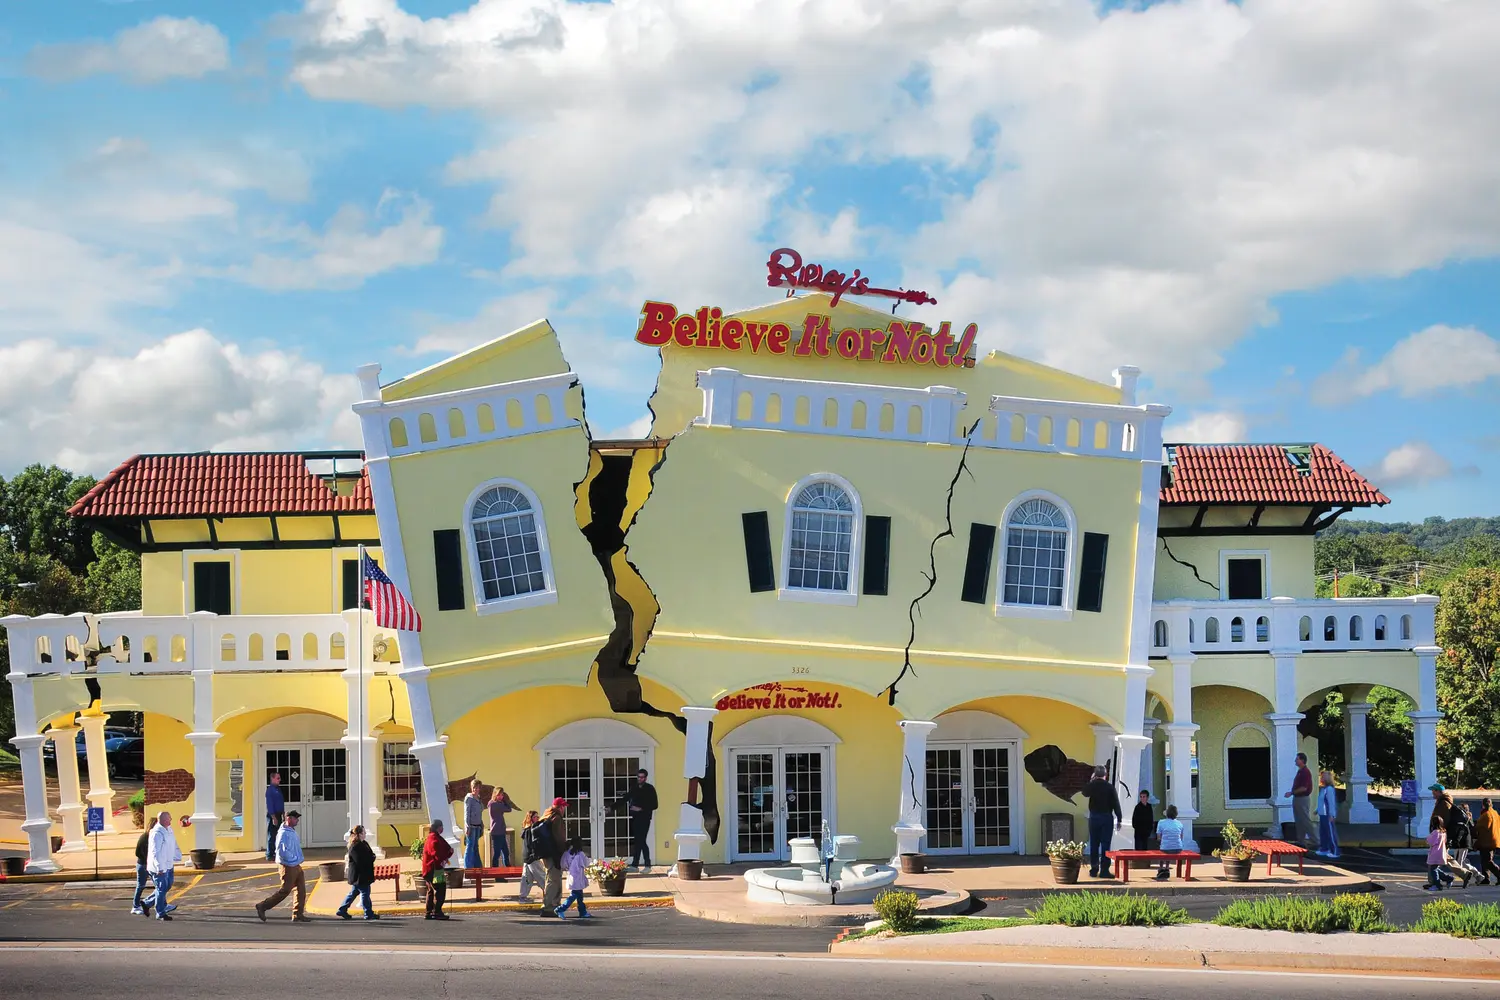 The front facade of the Ripley’s Believe It or Not! building in Branson, MO.